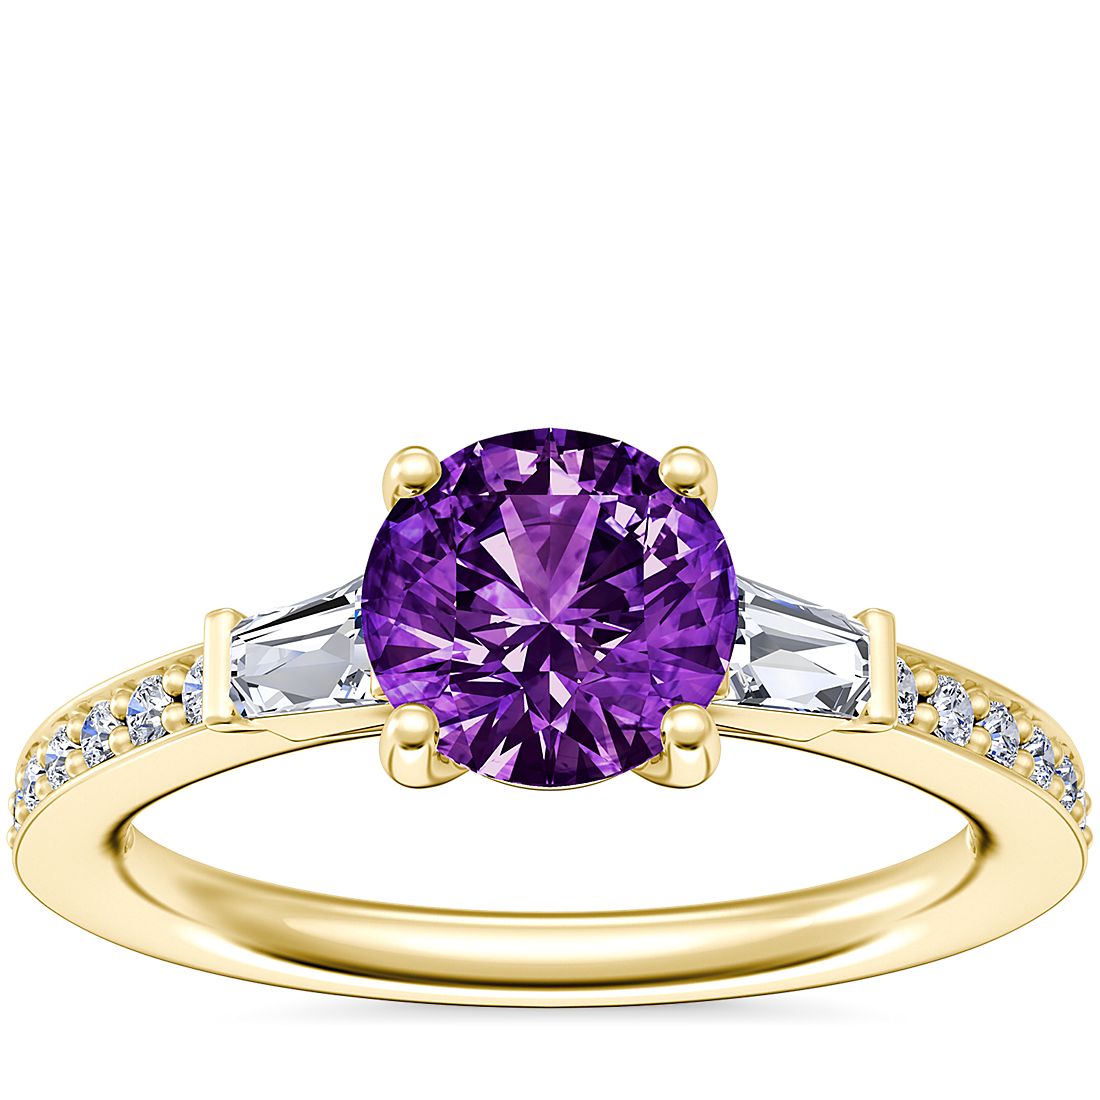 Tapered Baguette Diamond Cathedral Engagement Ring with Round Amethyst in 14k Yellow Gold (6.5mm)